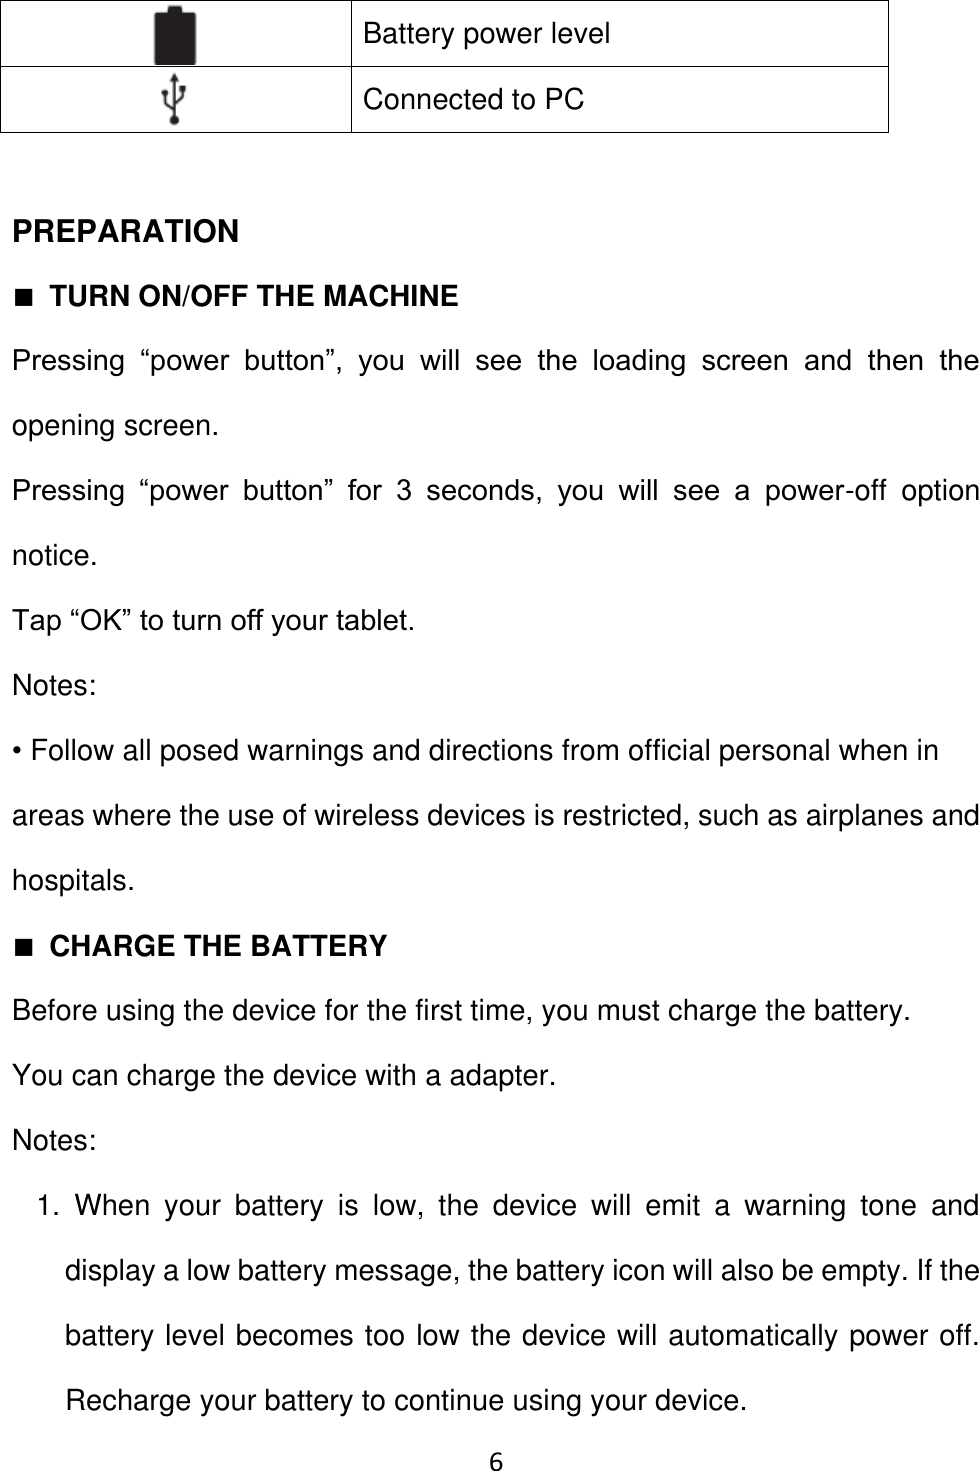 6   Battery power level    Connected to PC    PREPARATION ■ TURN ON/OFF THE MACHINE Pressing  “power  button”,  you  will  see  the  loading  screen  and  then  the opening screen.   Pressing  “power  button”  for  3  seconds,  you  will  see  a  power-off  option notice.   Tap “OK” to turn off your tablet.   Notes:   • Follow all posed warnings and directions from official personal when in areas where the use of wireless devices is restricted, such as airplanes and hospitals. ■ CHARGE THE BATTERY Before using the device for the first time, you must charge the battery.   You can charge the device with a adapter.   Notes:   1.  When  your  battery  is  low,  the  device  will  emit  a  warning  tone  and display a low battery message, the battery icon will also be empty. If the battery level becomes too low the device will automatically power off. Recharge your battery to continue using your device.   